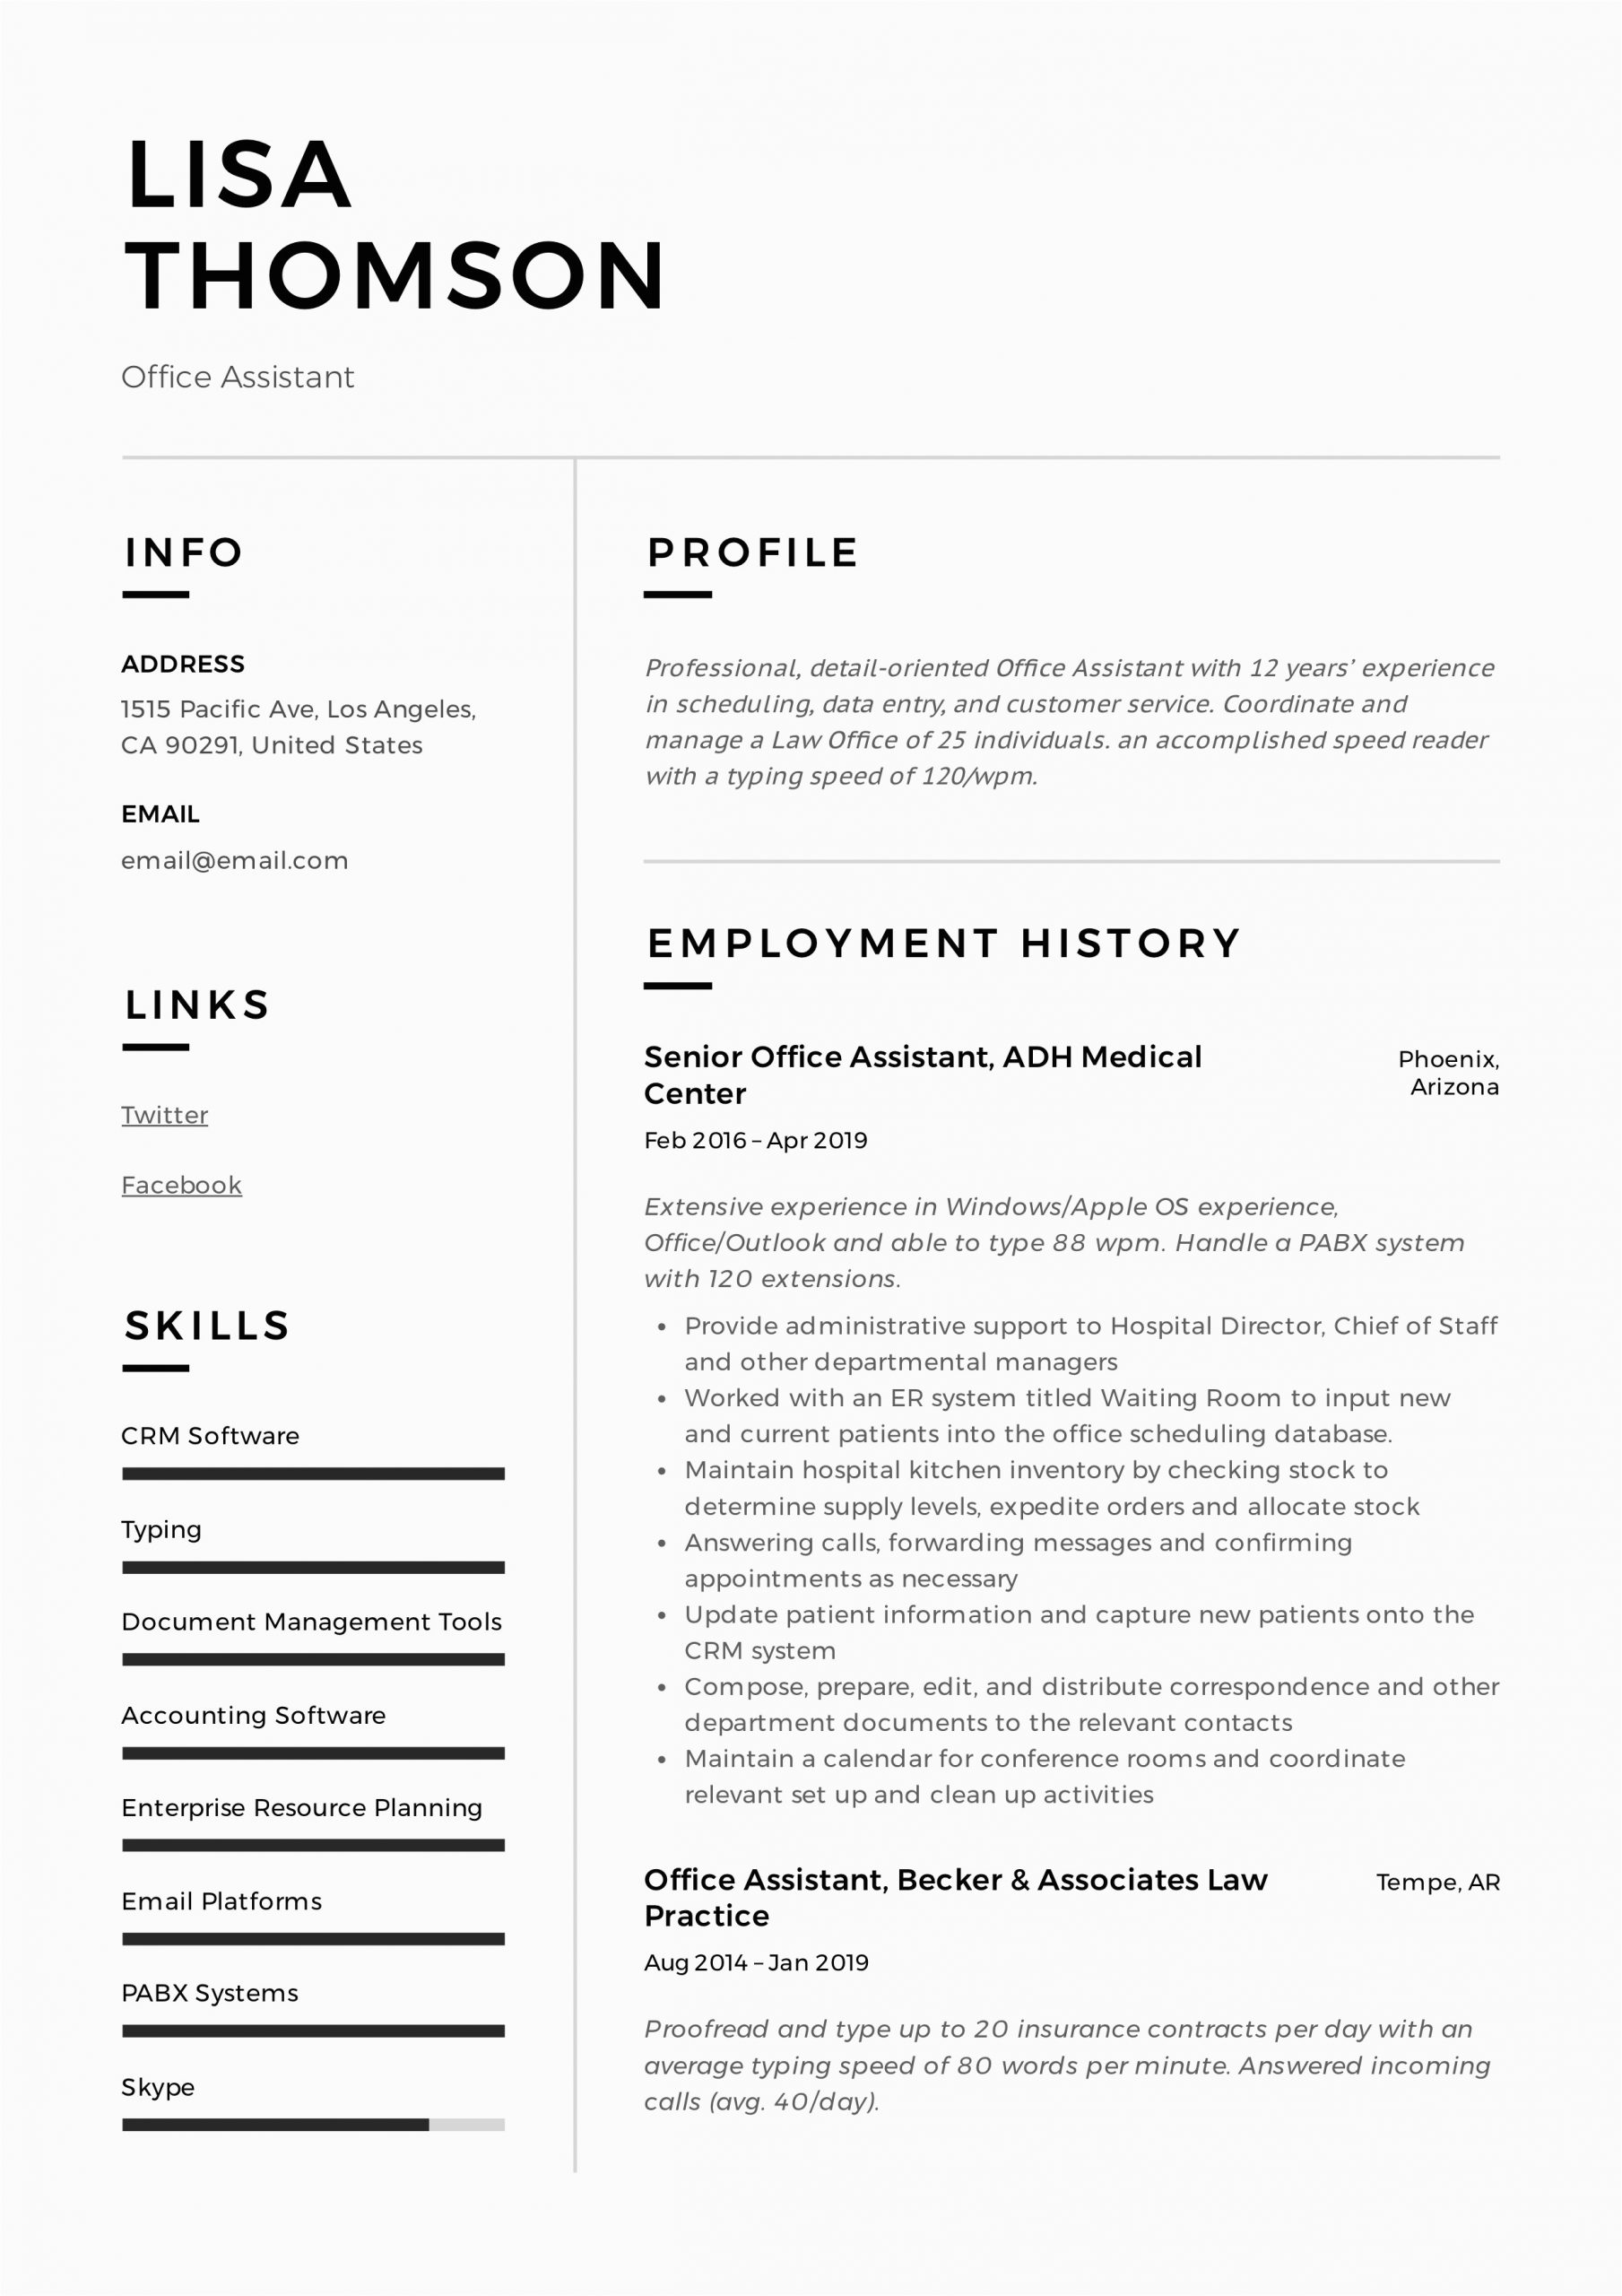 Resume Samples for Office assistant Job Fice assistant Resume Writing Guide